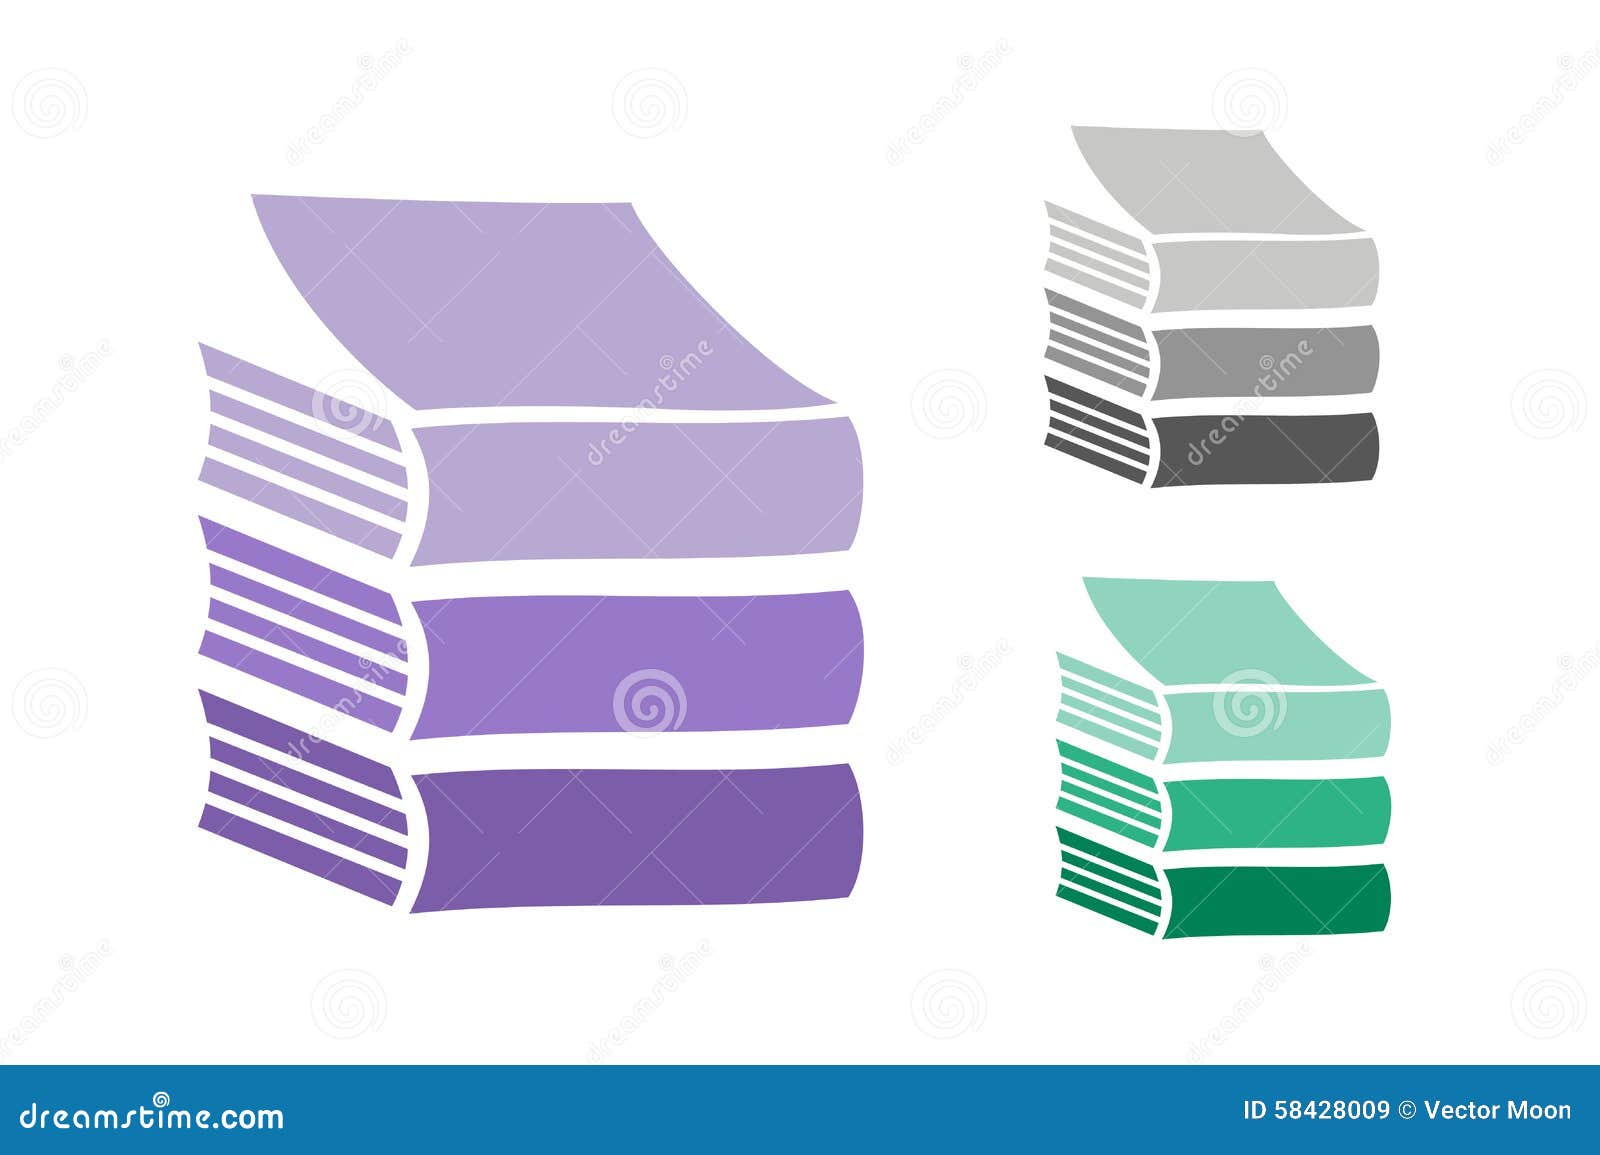 Books Vector Logo Icons Set. Sale Background Stock Vector